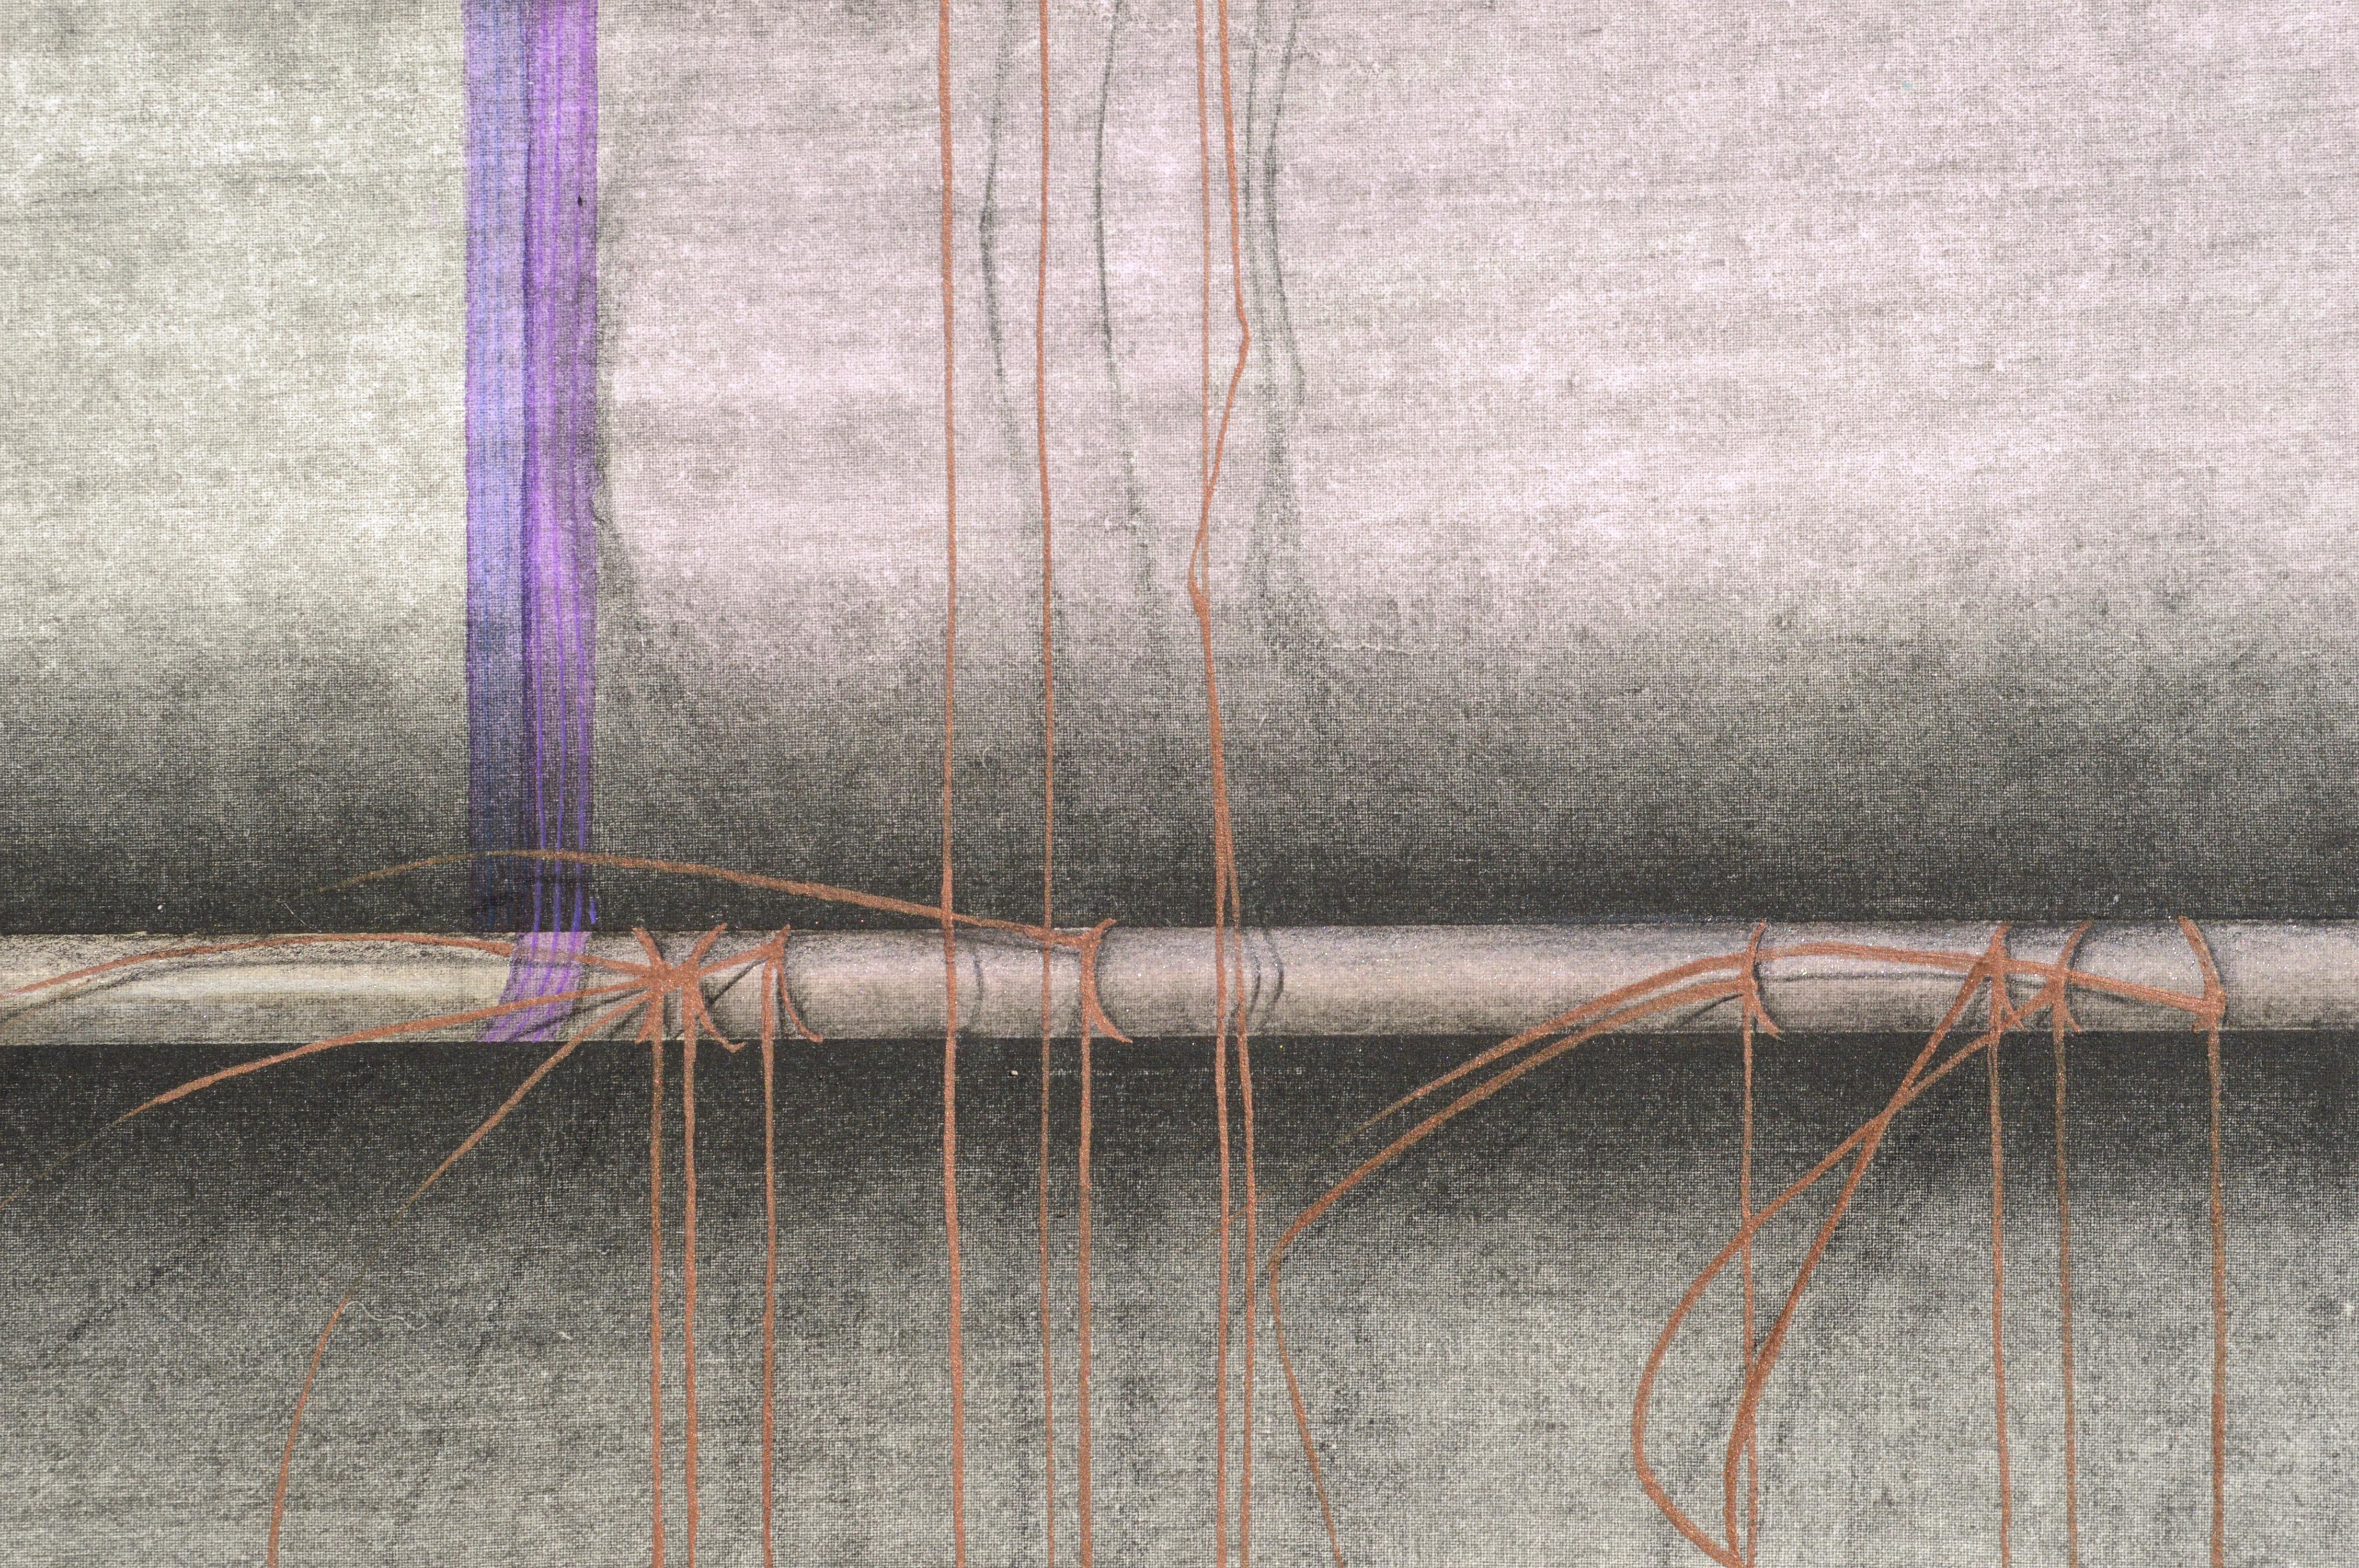 Purple Ribbons and Gold Threads - Hand-Augmented Abstract Collotype - Photorealist Painting by Patricia A Pearce